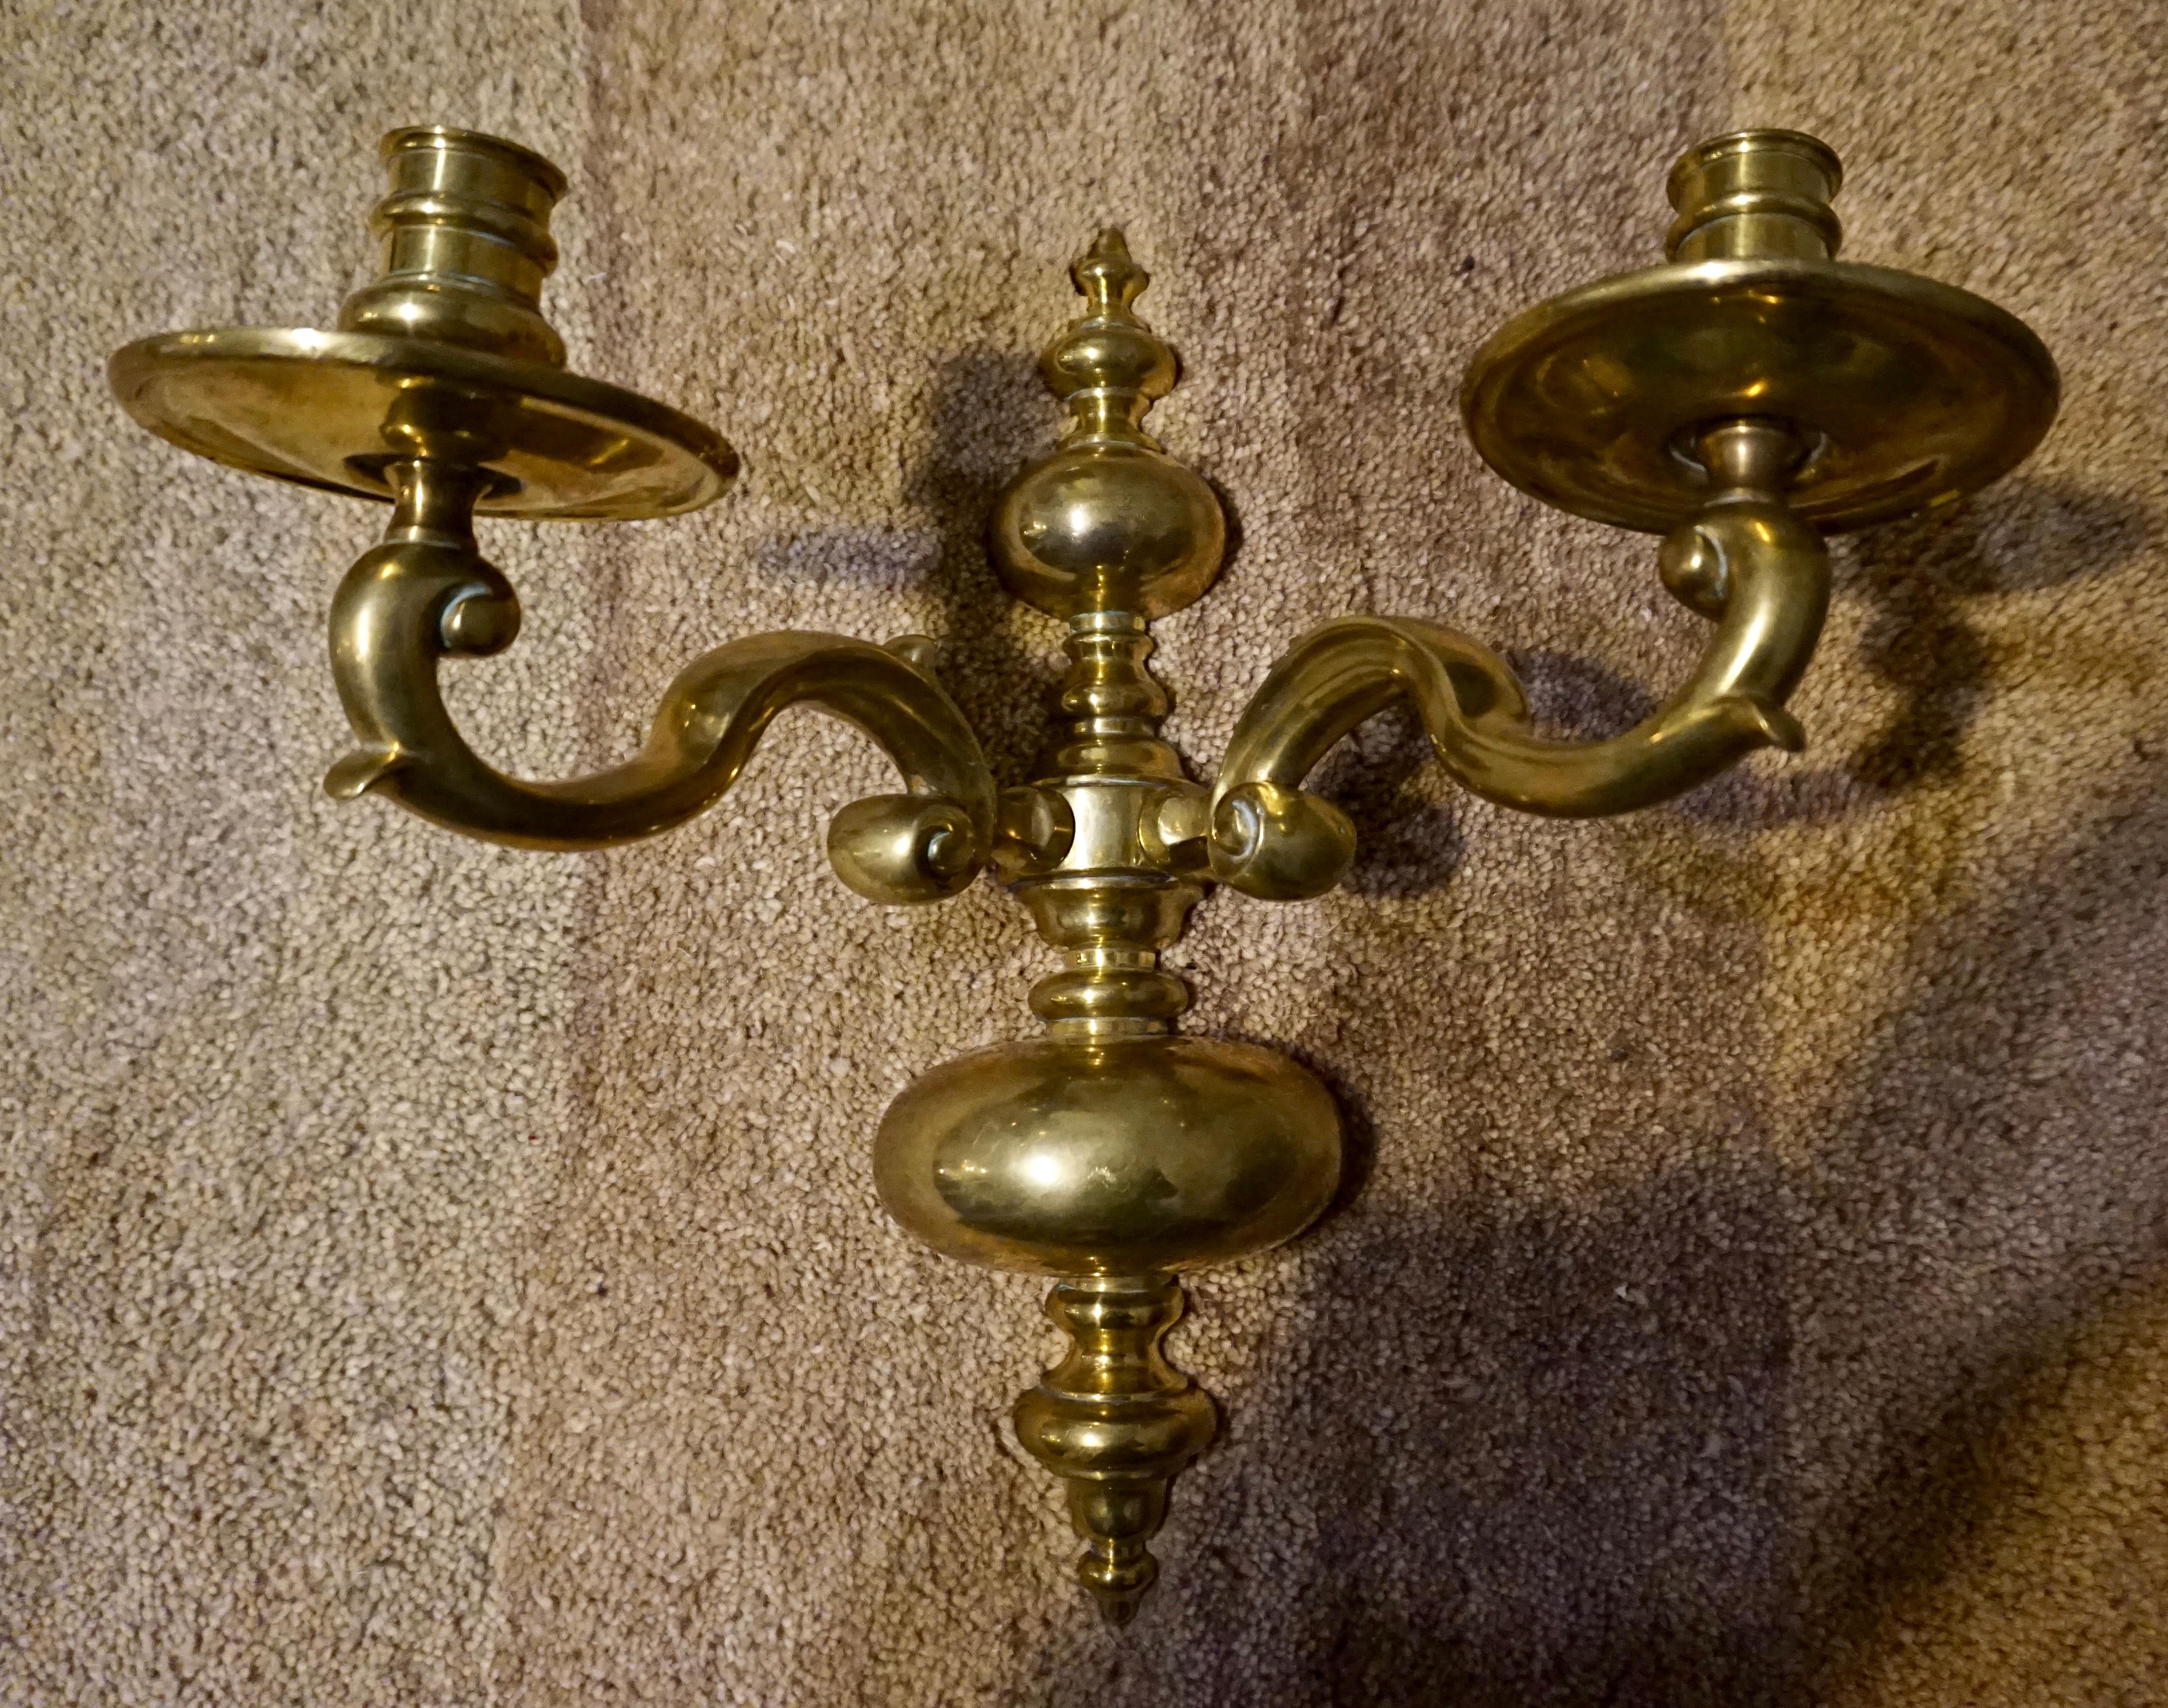 Victorian wall candelabra sturdily made with high quality brass fittings and exuding a rich lustre. Well proportioned and original patination,

circa 1890s.